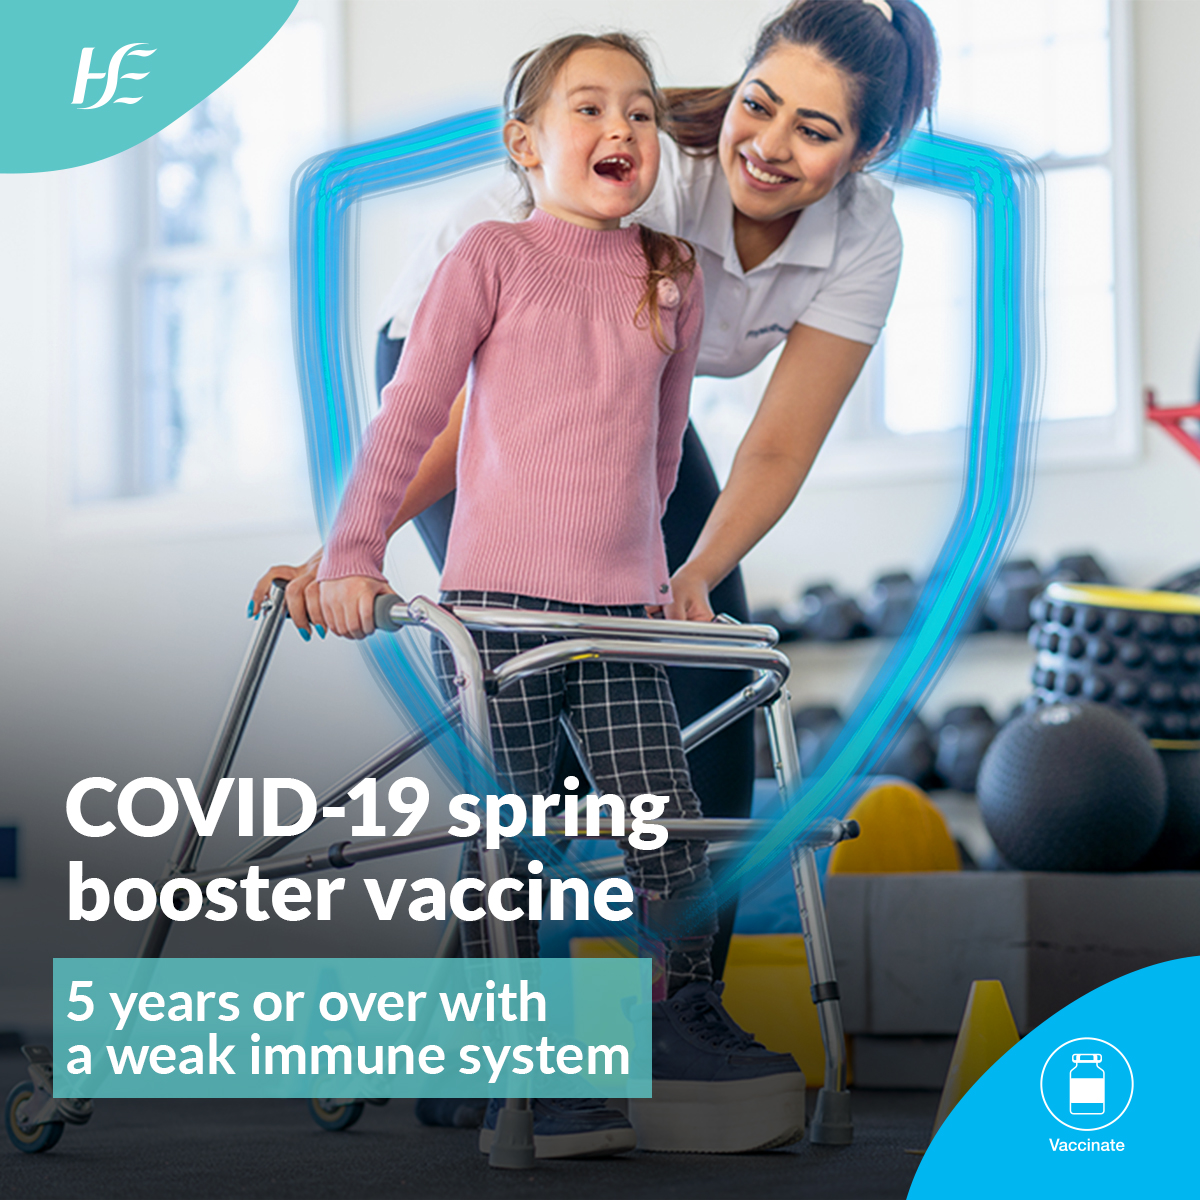 Getting vaccinated is the best way we can protect ourselves from COVID-19. If you have a weak immune system, it's time for your recommended spring booster. For more information, visit: bit.ly/3JJ6W0U #COVIDVaccine